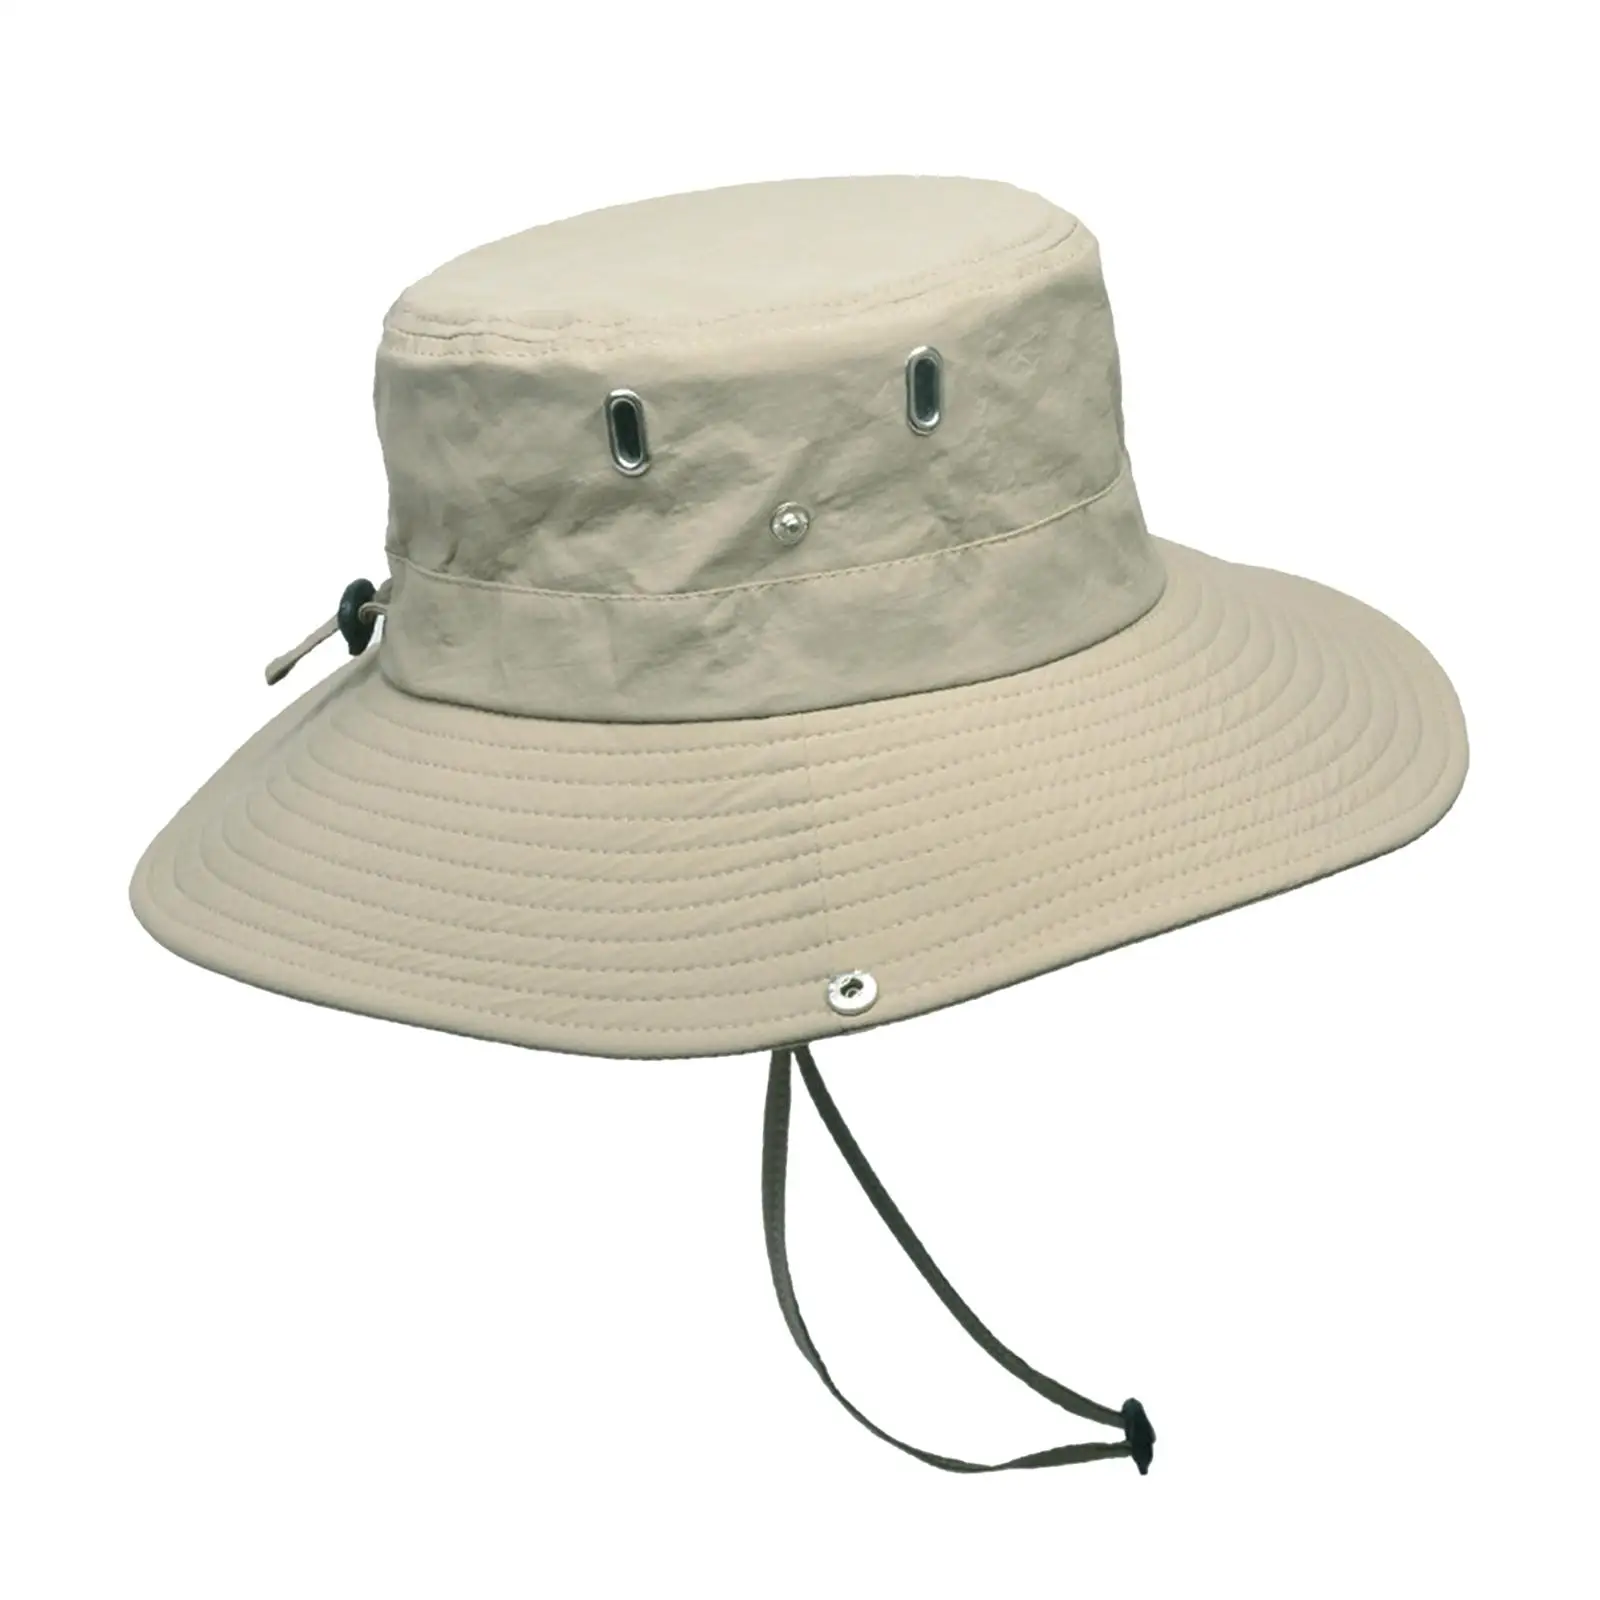 Bucket Hat Polyester Breathable Sun Protection Photo Props Fisherman Caps for Costume Accessories Hiking Sports Shopping Men